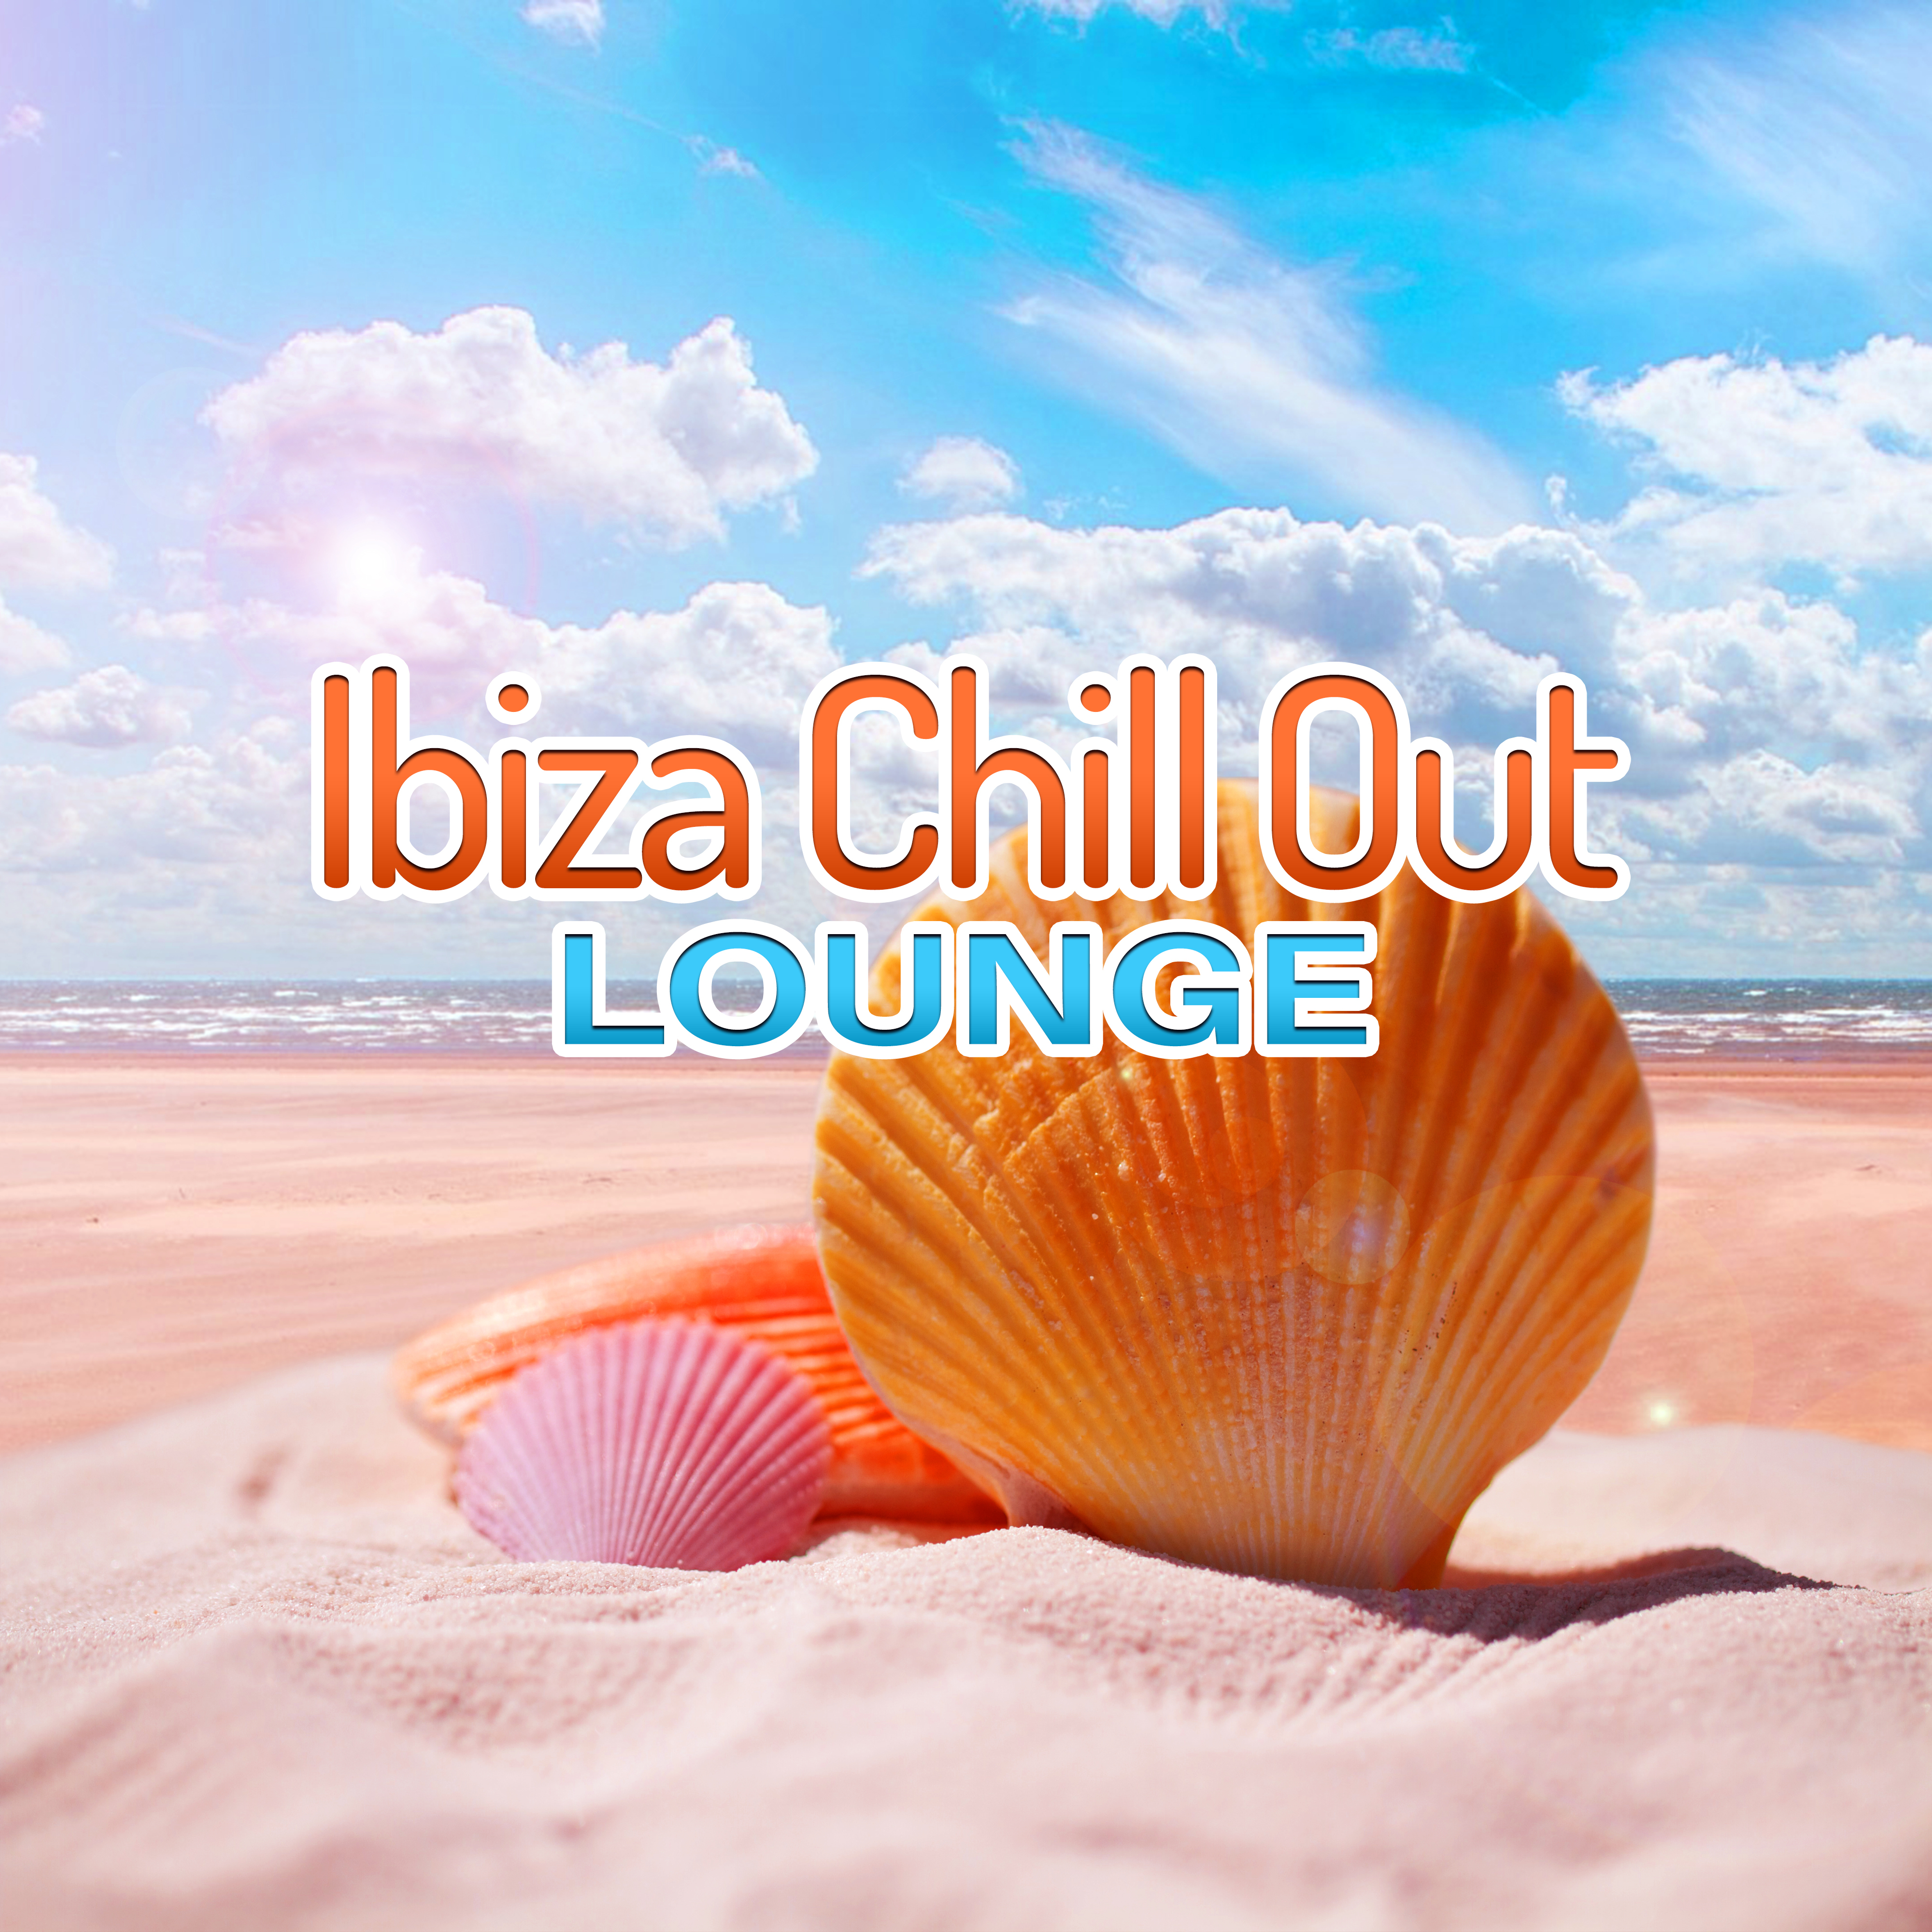 Ibiza Chill Out Lounge – Calm Sounds to Rest, Ibiza Relaxation, Beach Lounge, Summer 2017